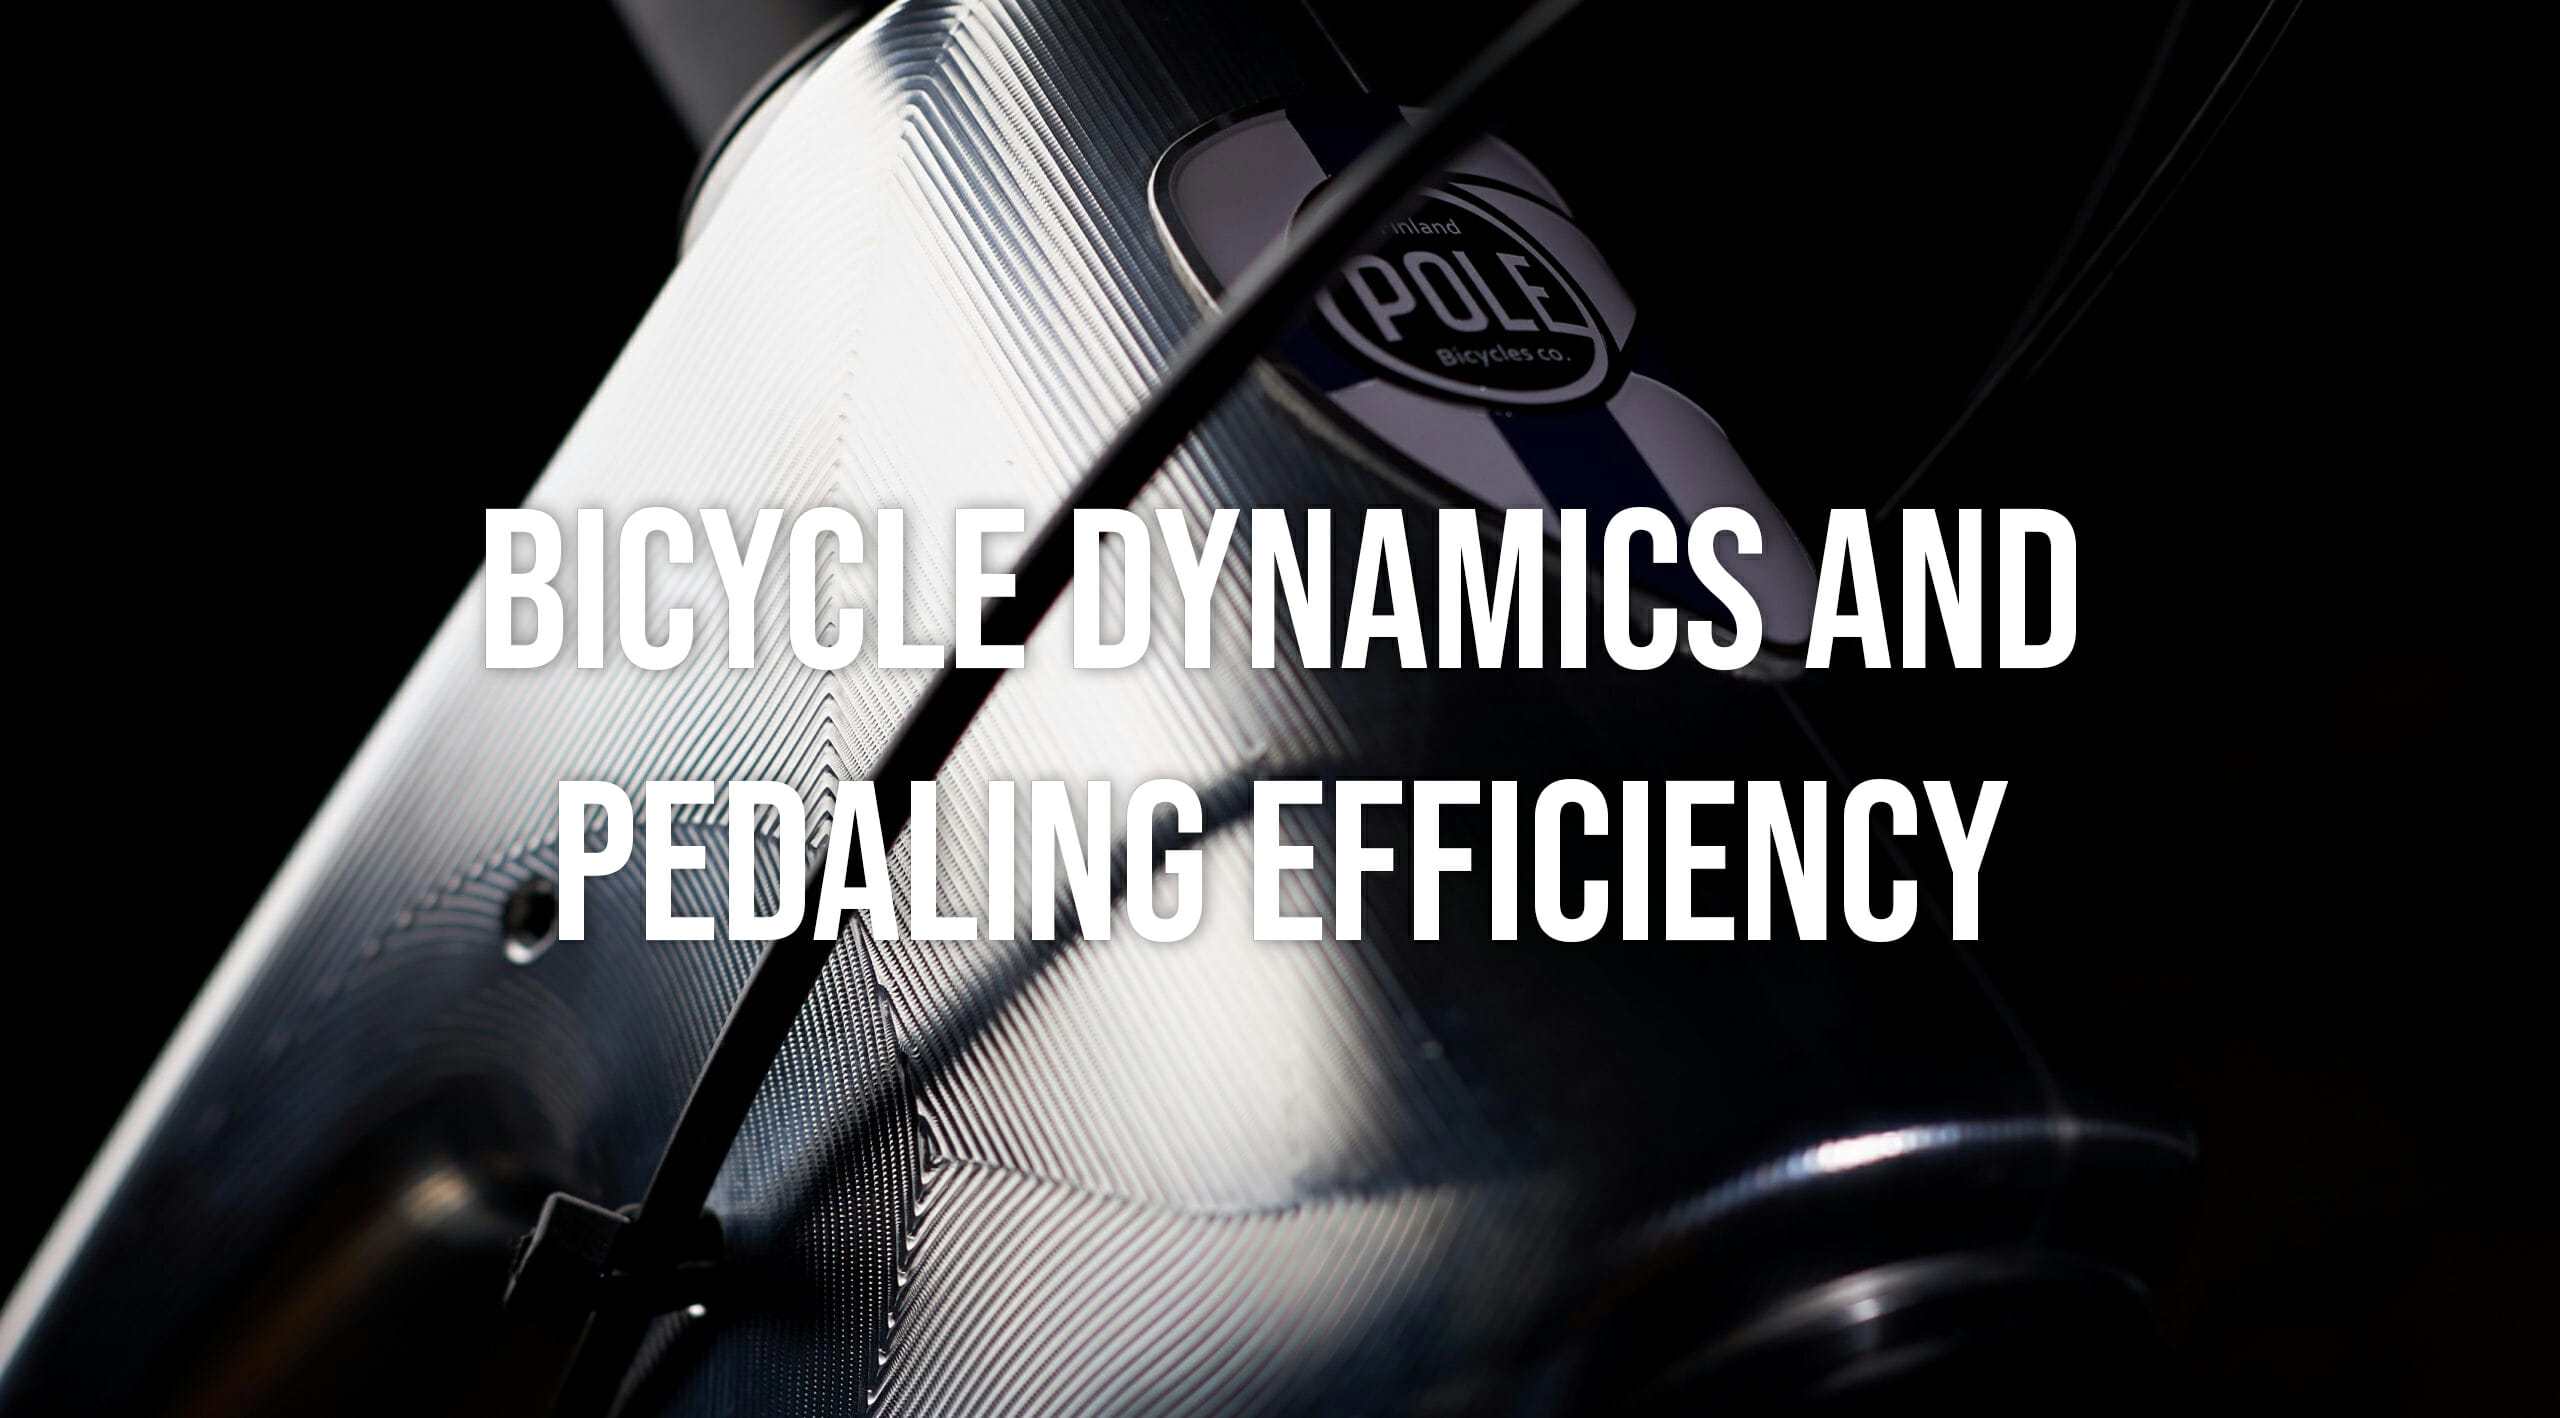 pole-bicycles-bicycle-dynamics-and-pedaling-efficiency